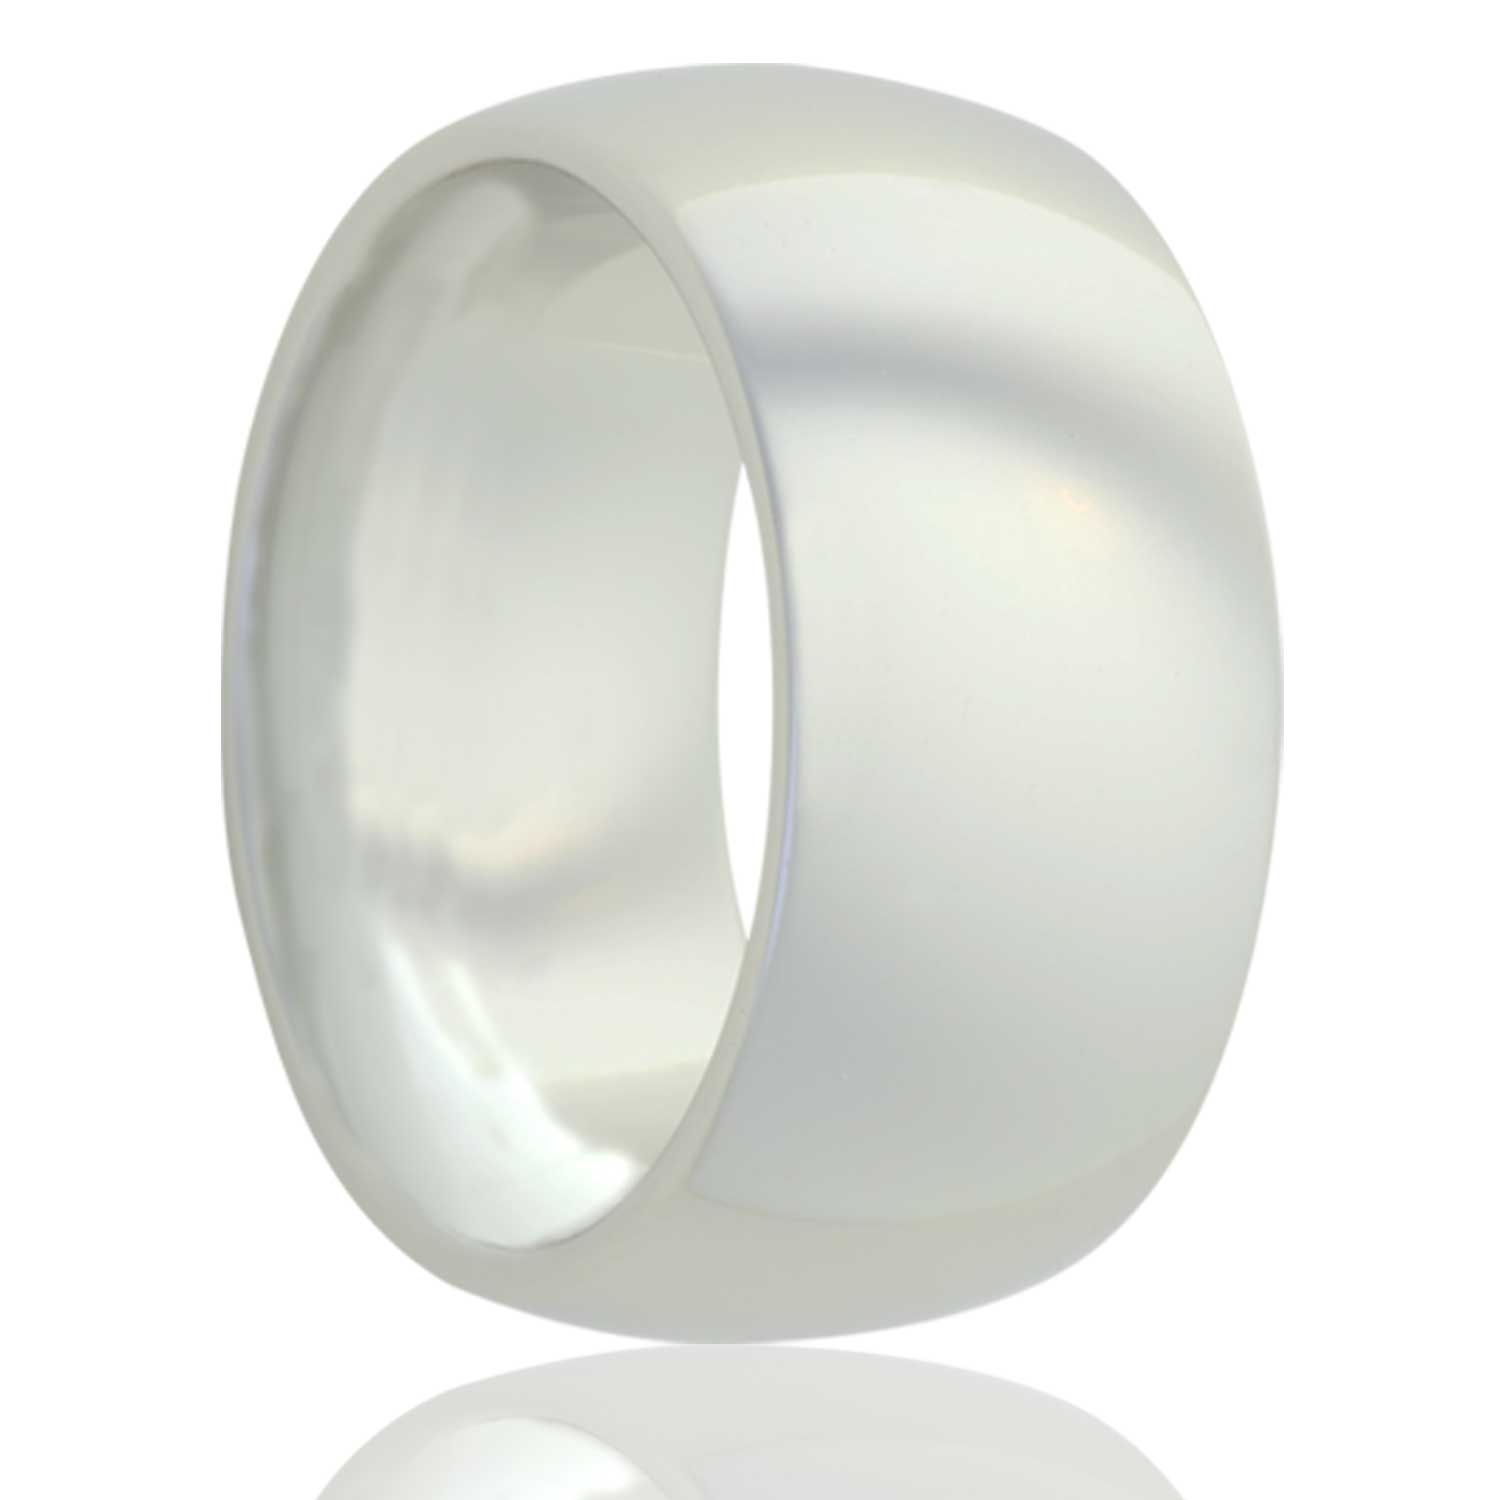 A domed white ceramic wedding band displayed on a neutral white background.